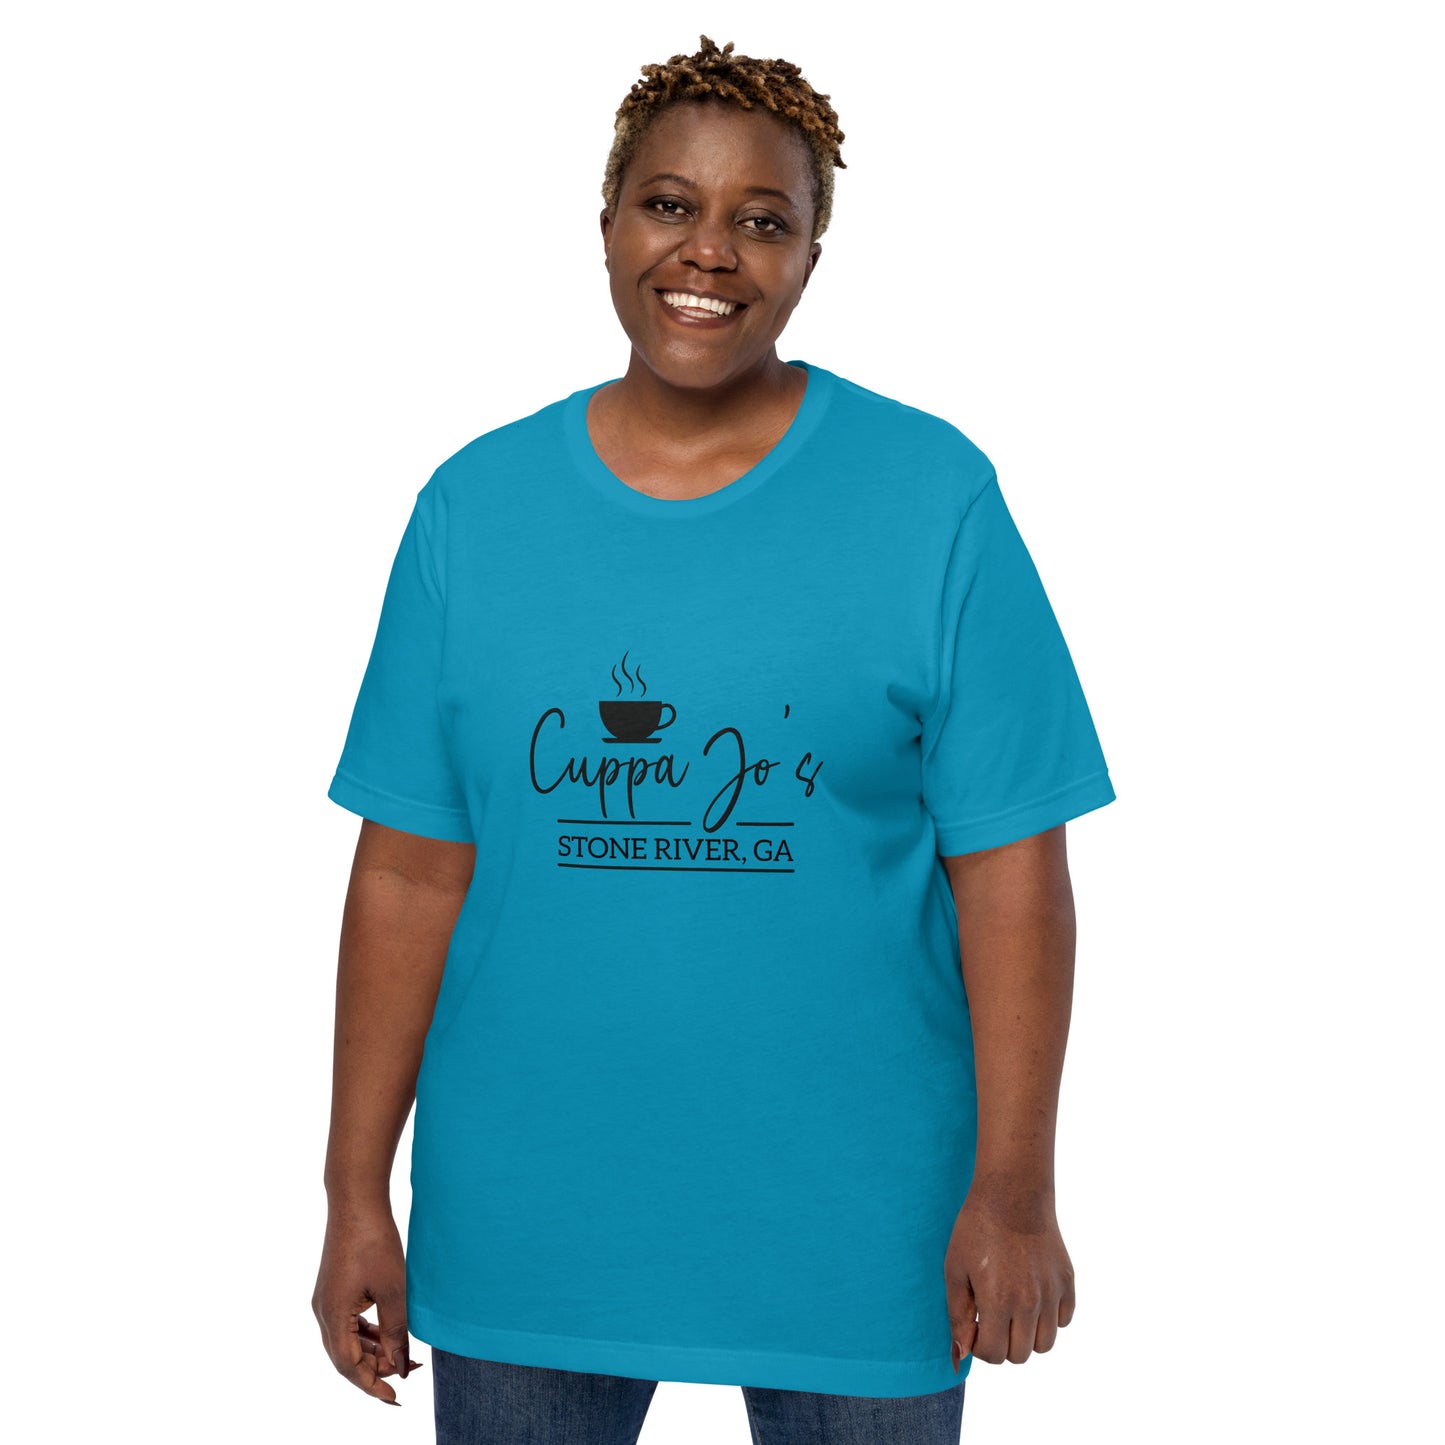 Unisex t-shirt FEATURING CUPPA JO'S FROM THE STONE RIVER SERIES!